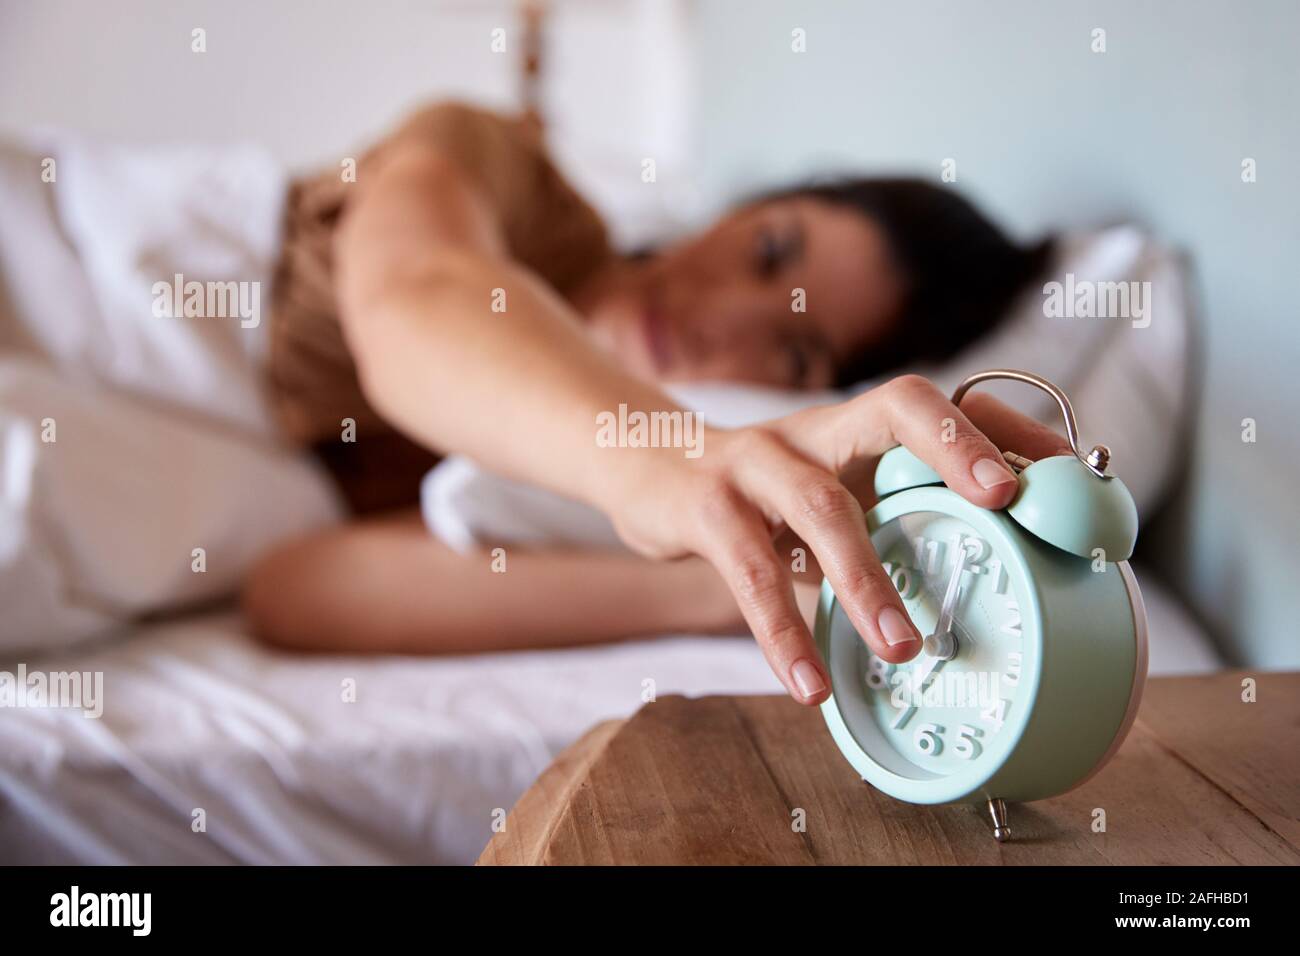 Mid adult woman lying in bed, reaching out to alarm clock on the bedside table in the foreground Stock Photo